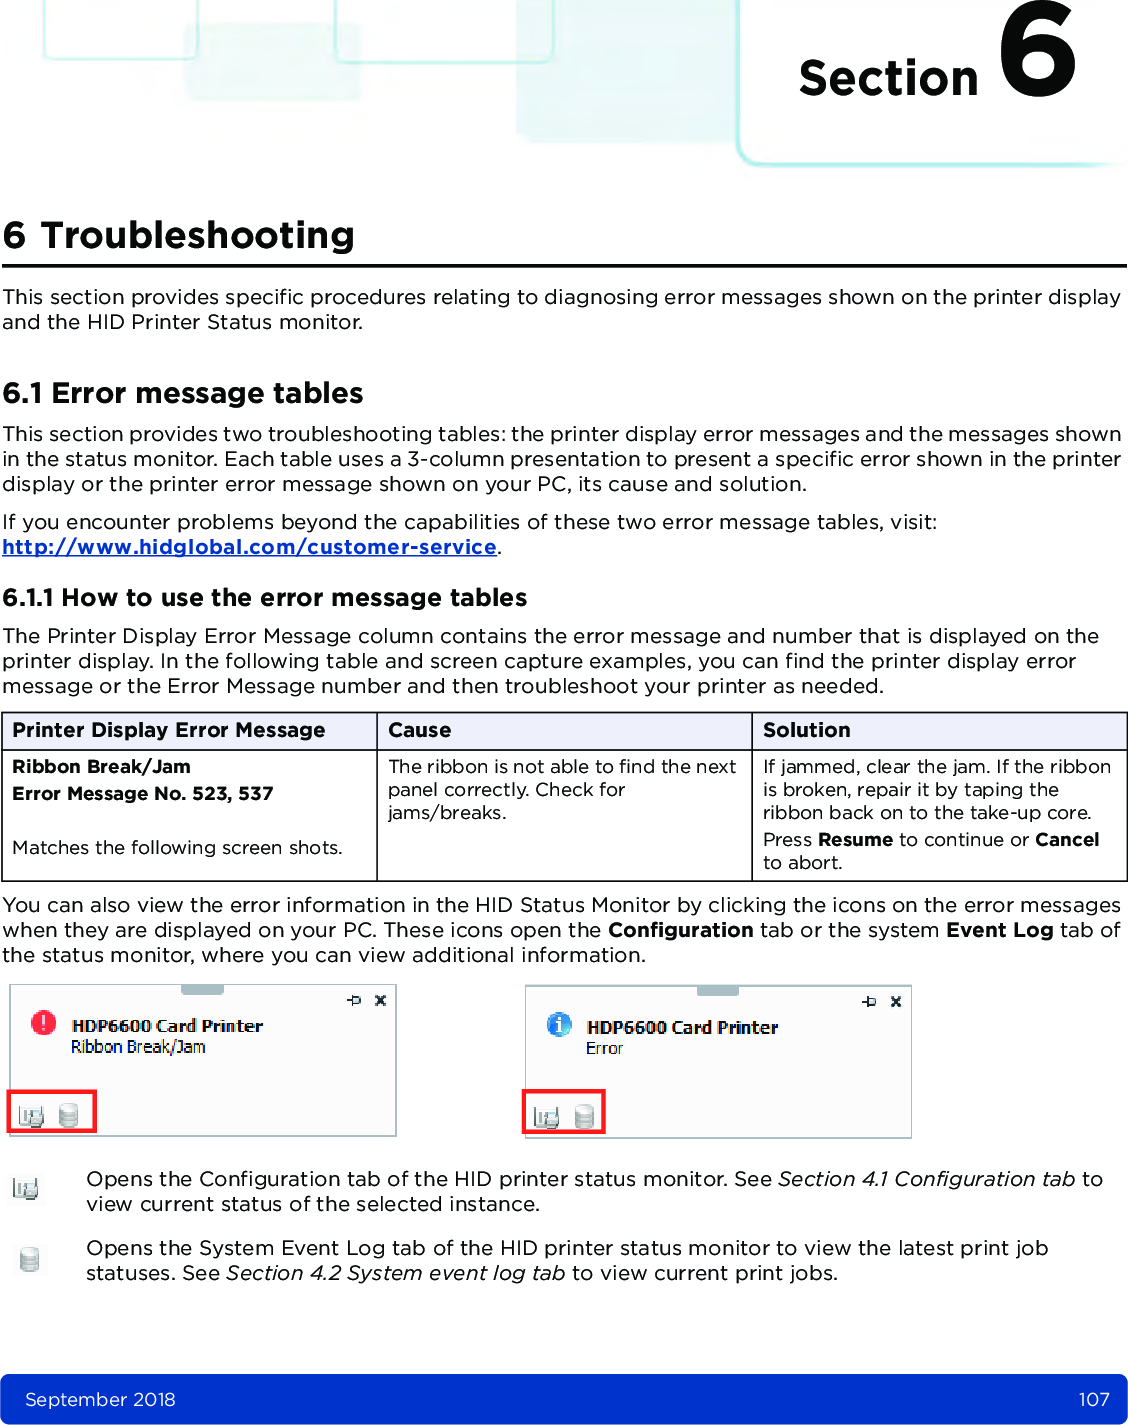 Section 6September 2018 1076 TroubleshootingThis section provides specific procedures relating to diagnosing error messages shown on the printer display and the HID Printer Status monitor. 6.1 Error message tablesThis section provides two troubleshooting tables: the printer display error messages and the messages shown in the status monitor. Each table uses a 3-column presentation to present a specific error shown in the printer display or the printer error message shown on your PC, its cause and solution.If you encounter problems beyond the capabilities of these two error message tables, visit: http://www.hidglobal.com/customer-service.6.1.1 How to use the error message tablesThe Printer Display Error Message column contains the error message and number that is displayed on the printer display. In the following table and screen capture examples, you can find the printer display error message or the Error Message number and then troubleshoot your printer as needed. You can also view the error information in the HID Status Monitor by clicking the icons on the error messages when they are displayed on your PC. These icons open the Configuration tab or the system Event Log tab of the status monitor, where you can view additional information. Printer Display Error Message Cause SolutionRibbon Break/JamError Message No. 523, 537Matches the following screen shots.The ribbon is not able to find the next panel correctly. Check for jams/breaks.If jammed, clear the jam. If the ribbon is broken, repair it by taping the ribbon back on to the take-up core.Press Resume to continue or Cancel to abort.Opens the Configuration tab of the HID printer status monitor. See Section 4.1 Configuration tab to view current status of the selected instance.Opens the System Event Log tab of the HID printer status monitor to view the latest print job statuses. See Section 4.2 System event log tab to view current print jobs.